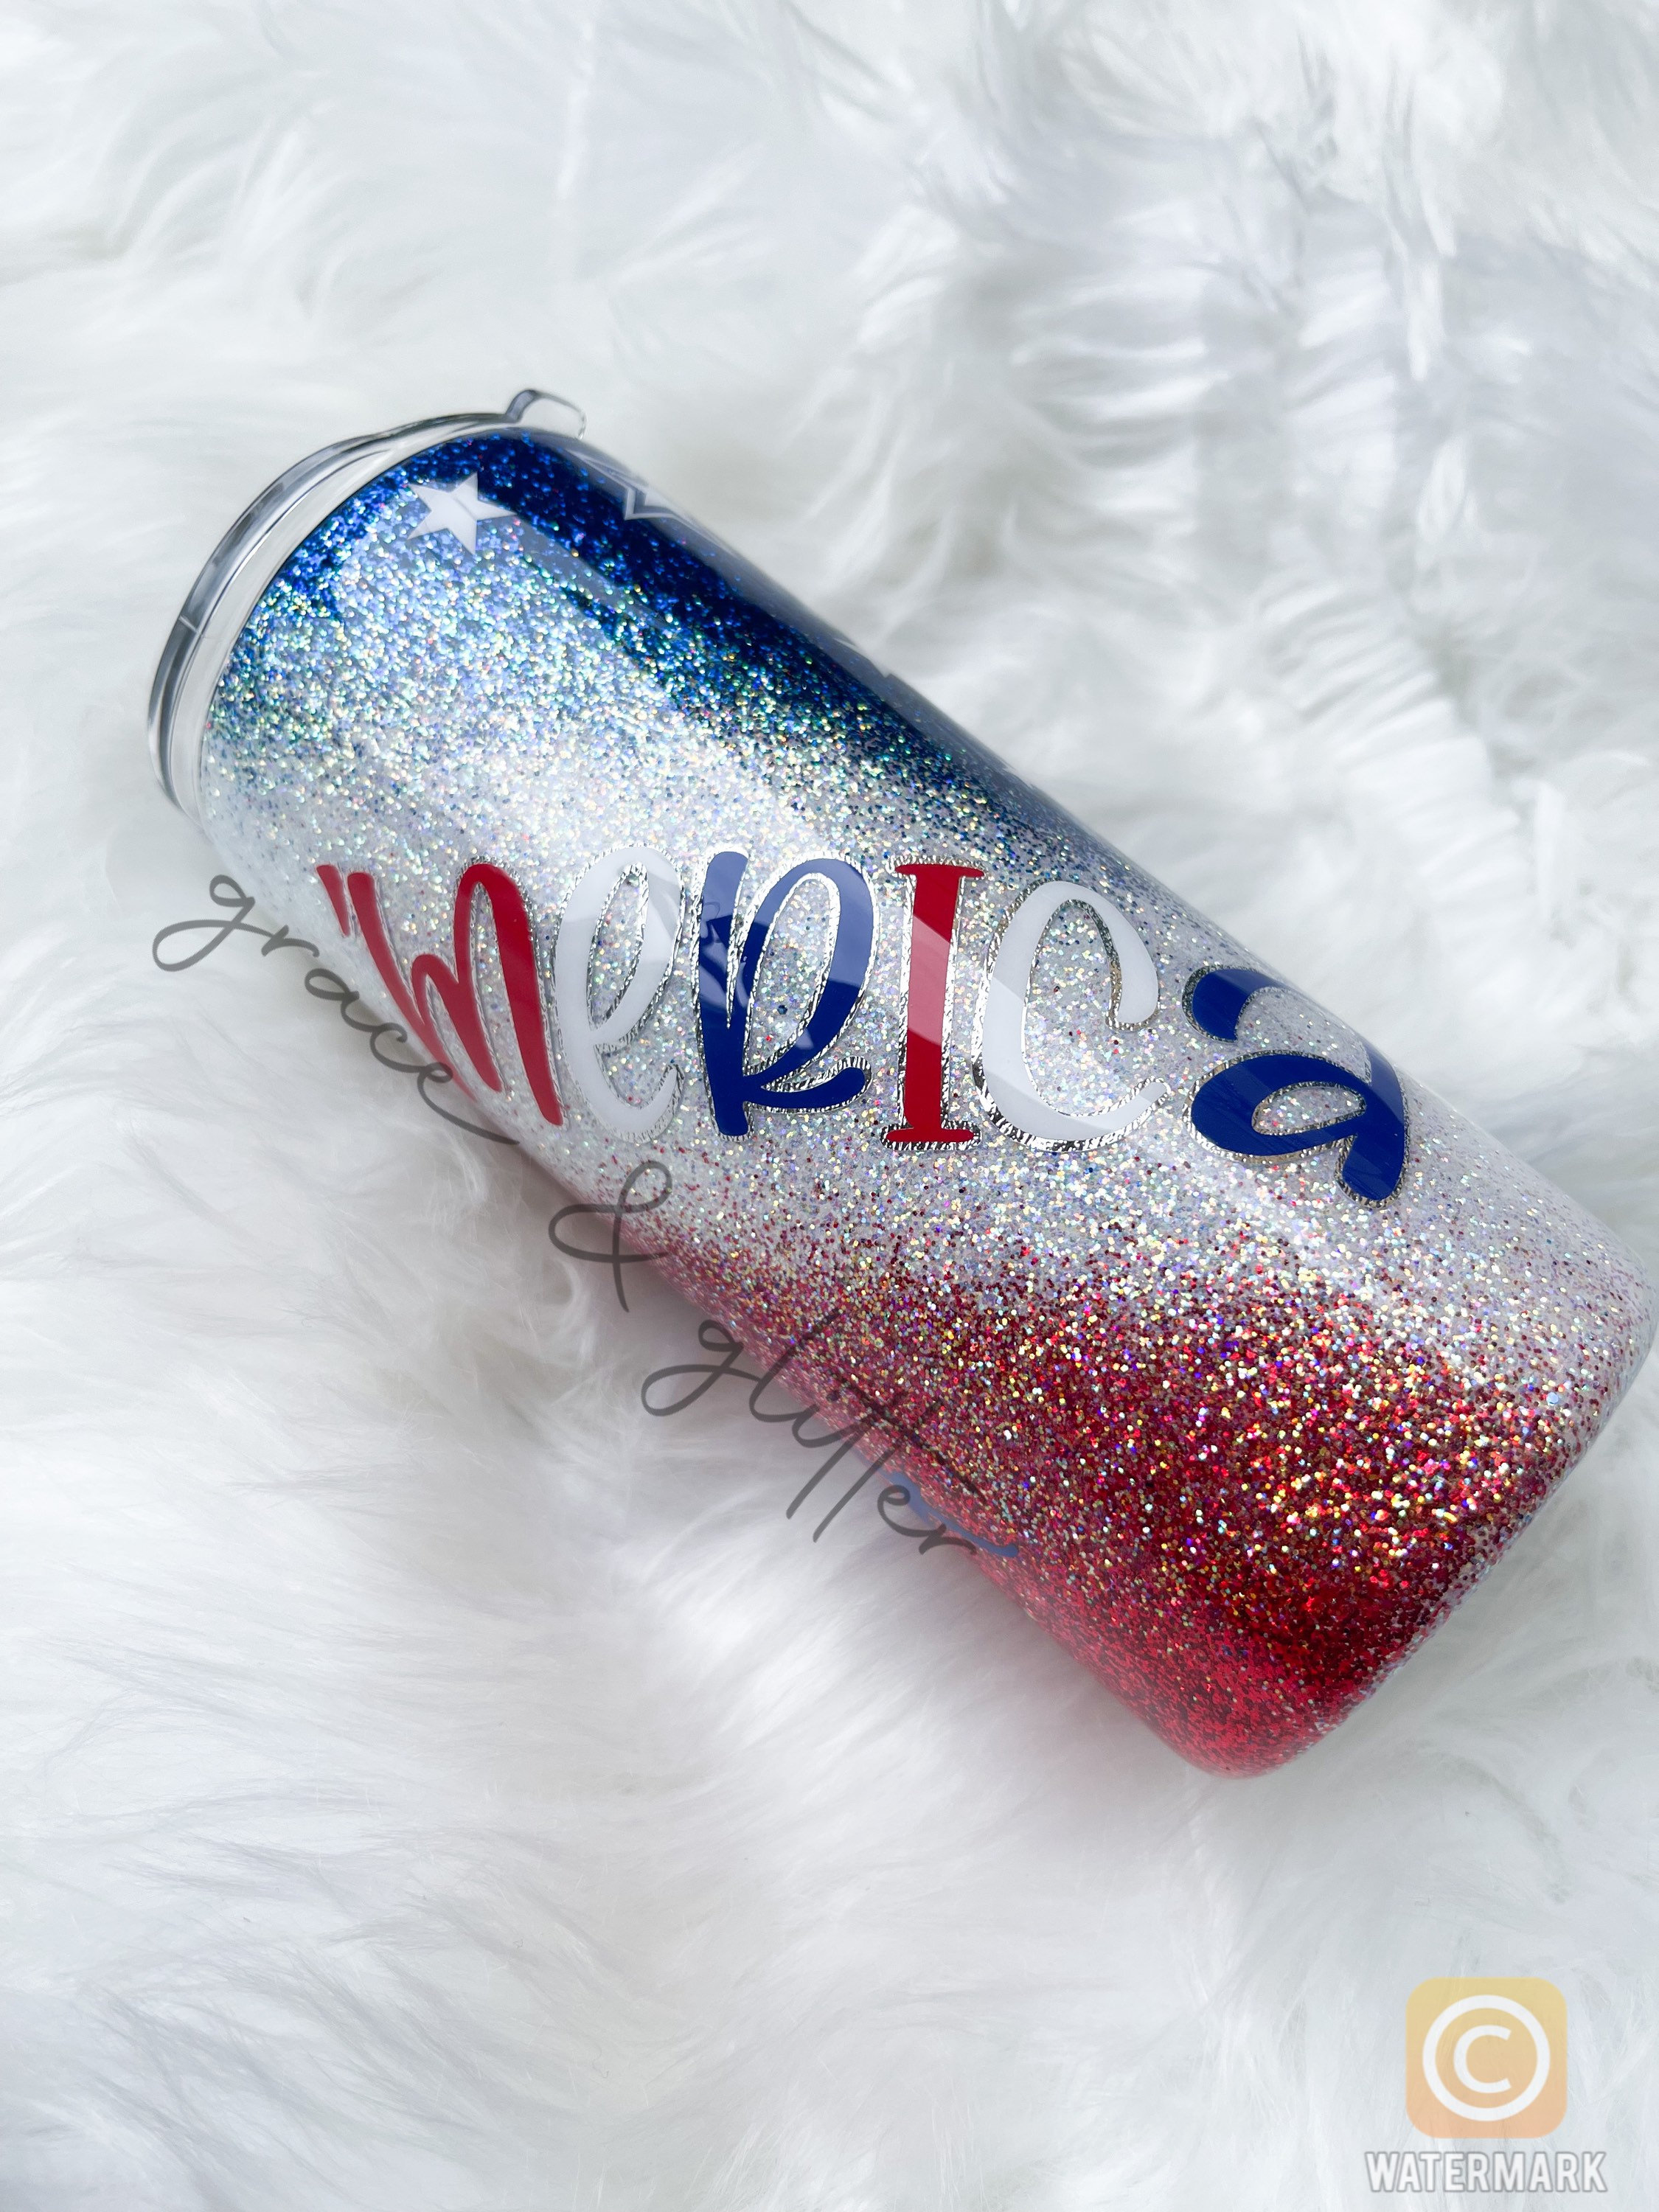 Funny Patriotic Slim Can Coolers - Red White and Booze Spiked